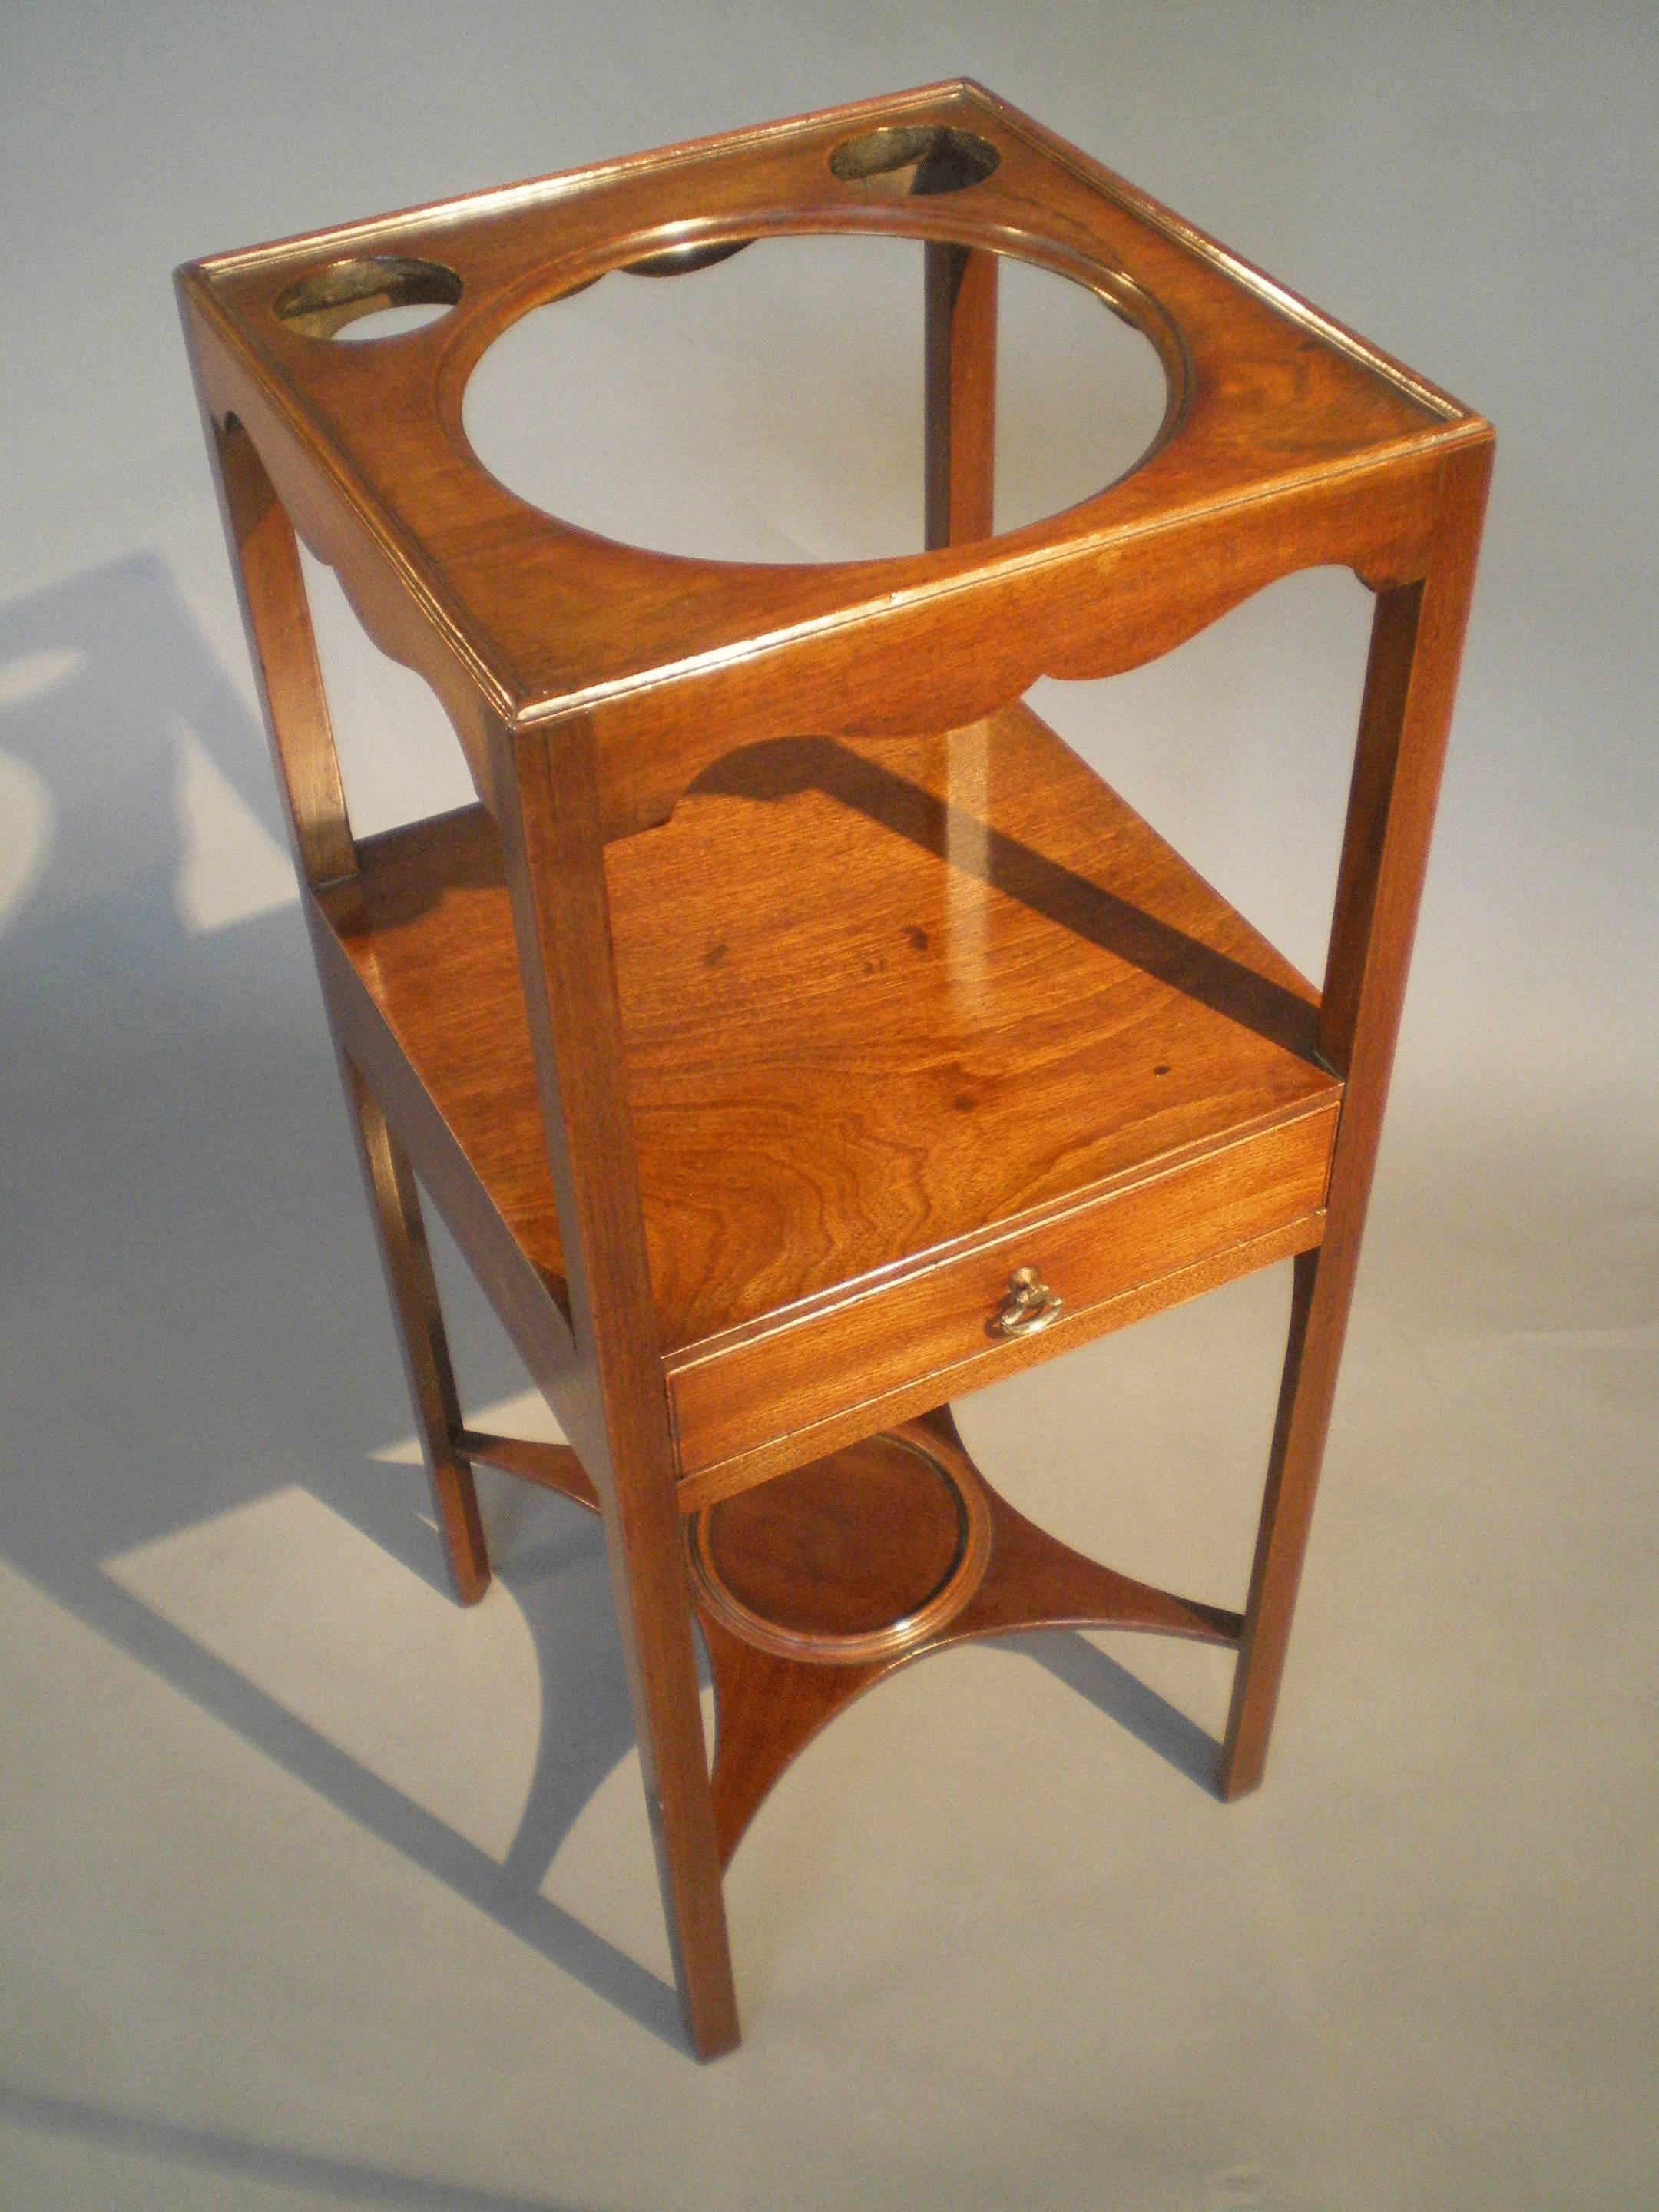 A good George III period mahogany washstand, the top with circular cut-outs for a bowl and soap dishes, above a plain shelf with drawer and supported on square uprights.